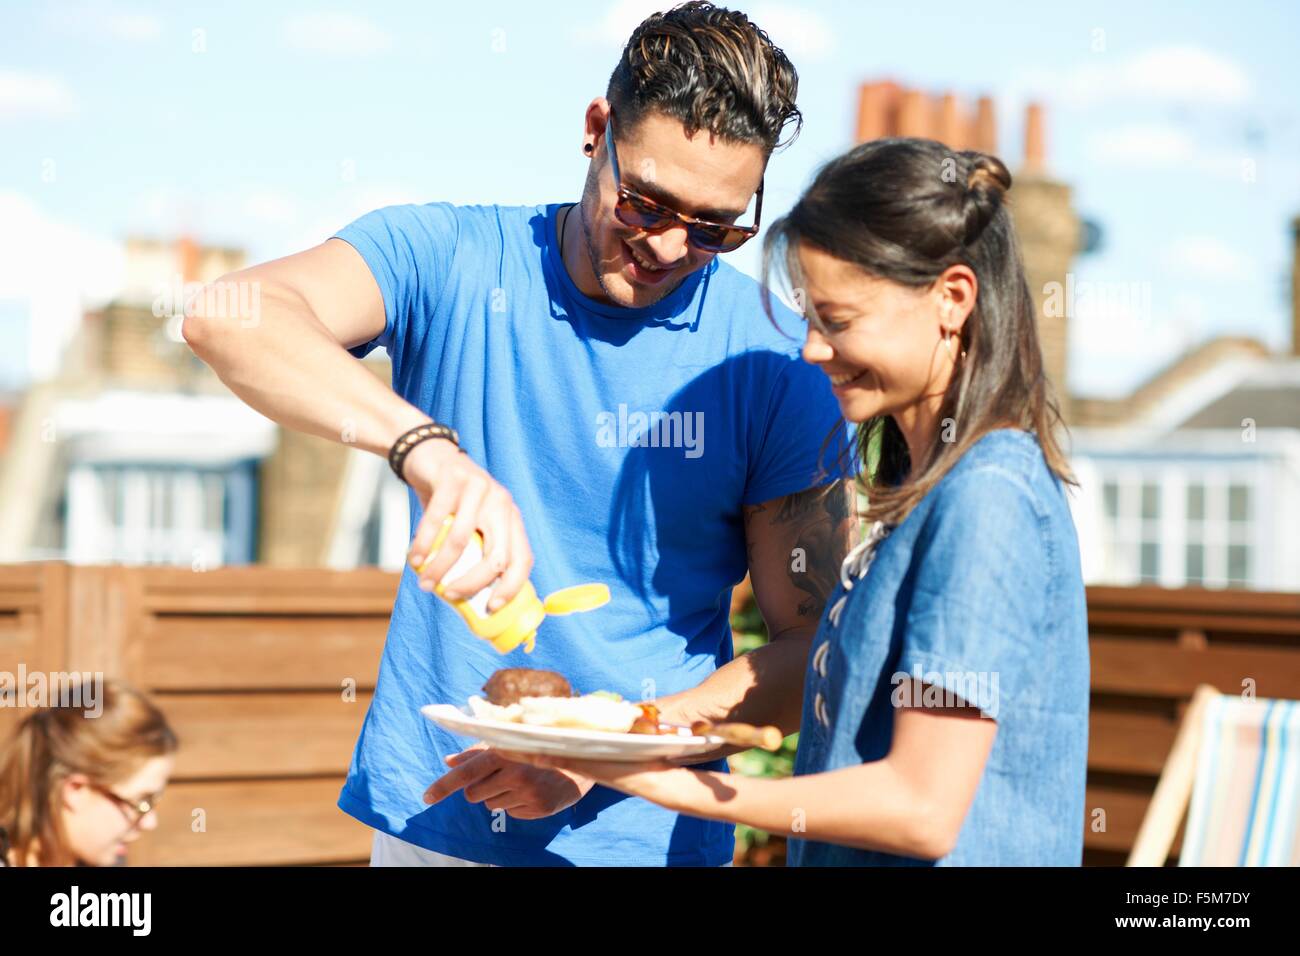 Mid adult man squirting mustard on burger at rooftop party Stock Photo